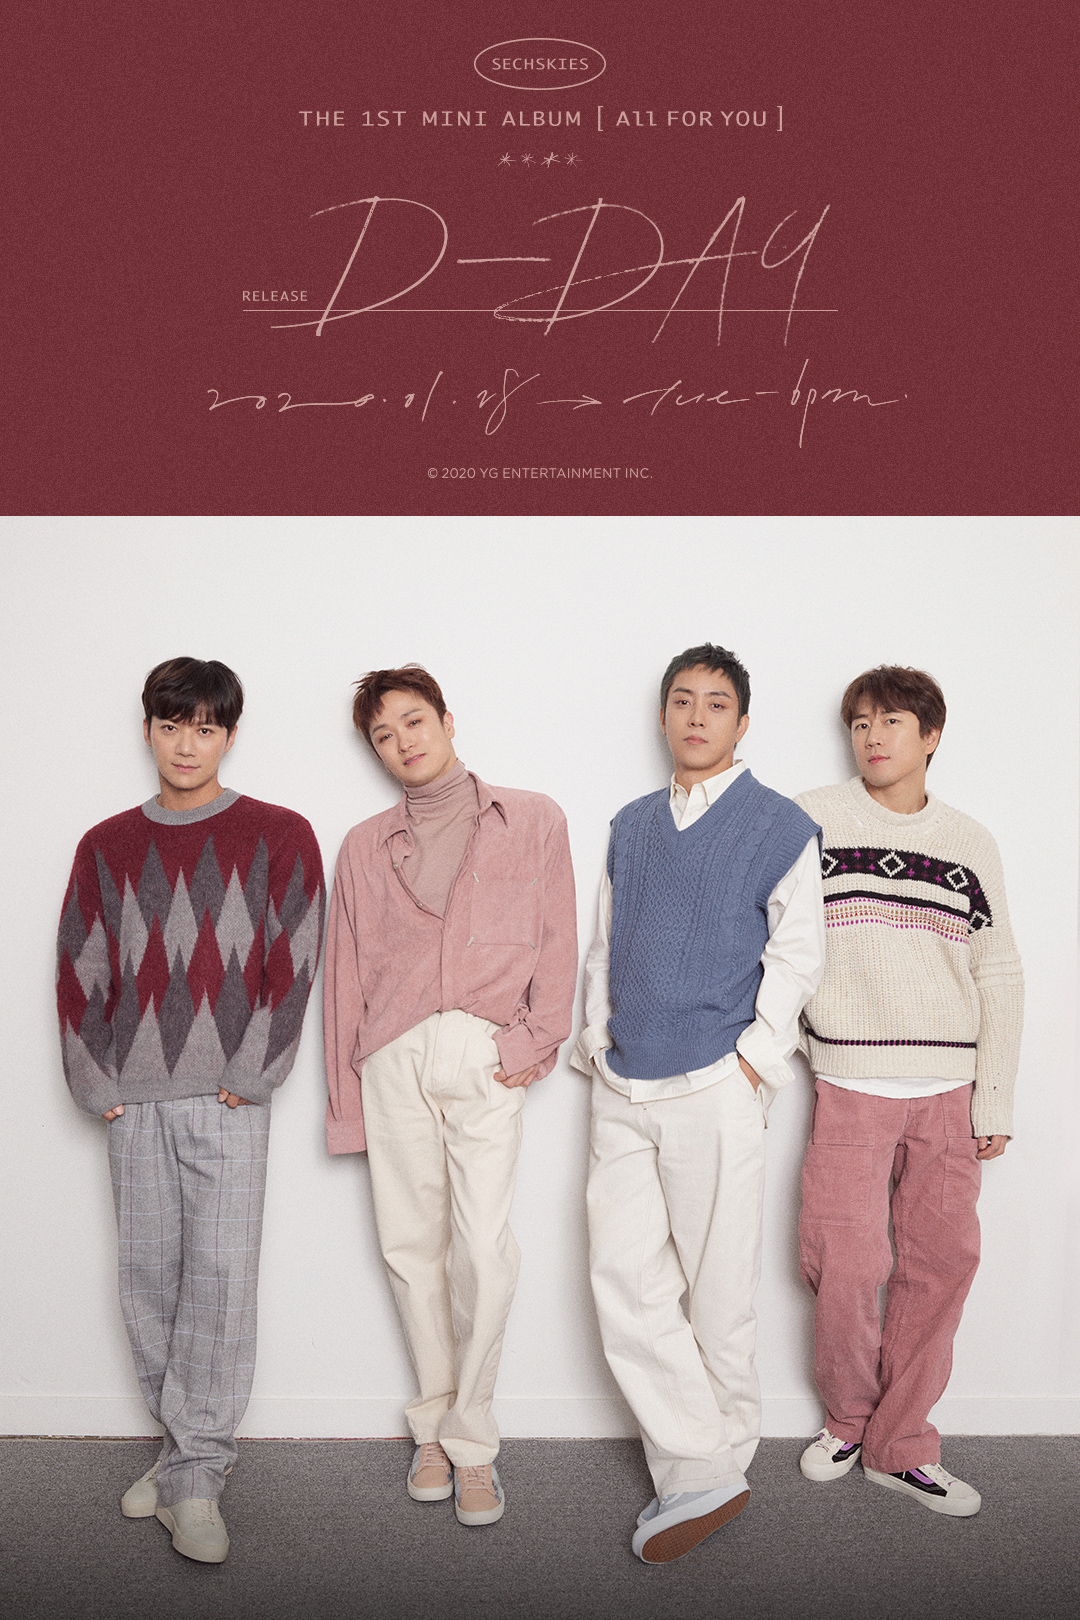 SECHSKIES - THE 1ST MINI ALBUM 'ALL FOR YOU' D-DAY POSTER | 인스티즈